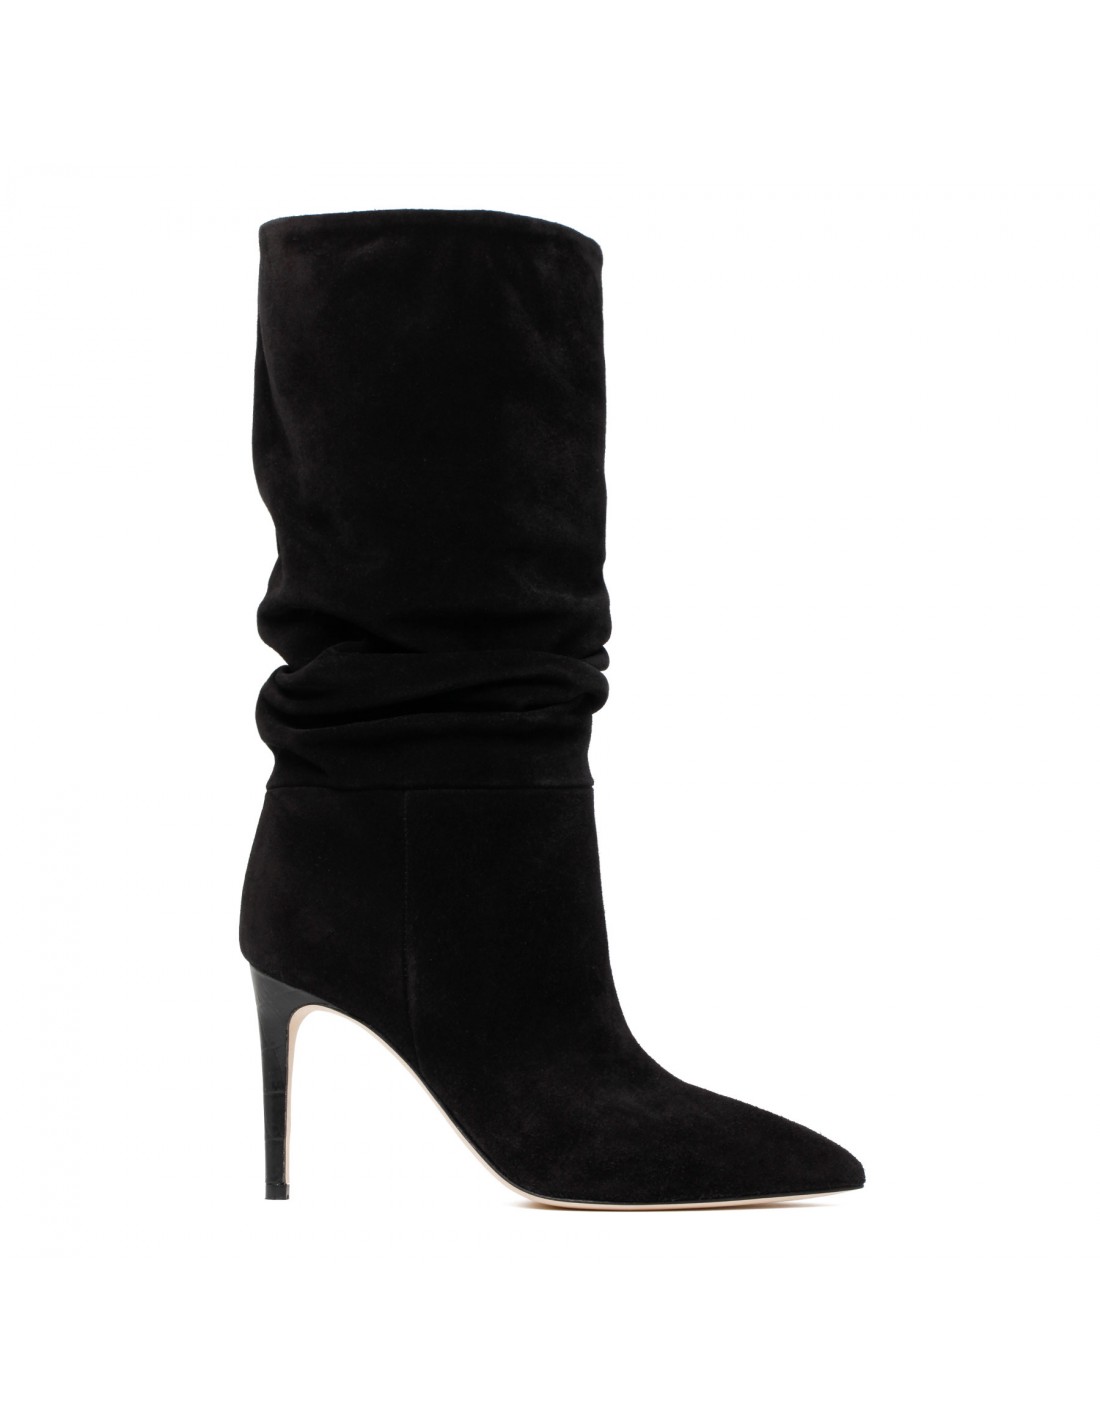 Slouchy black boots